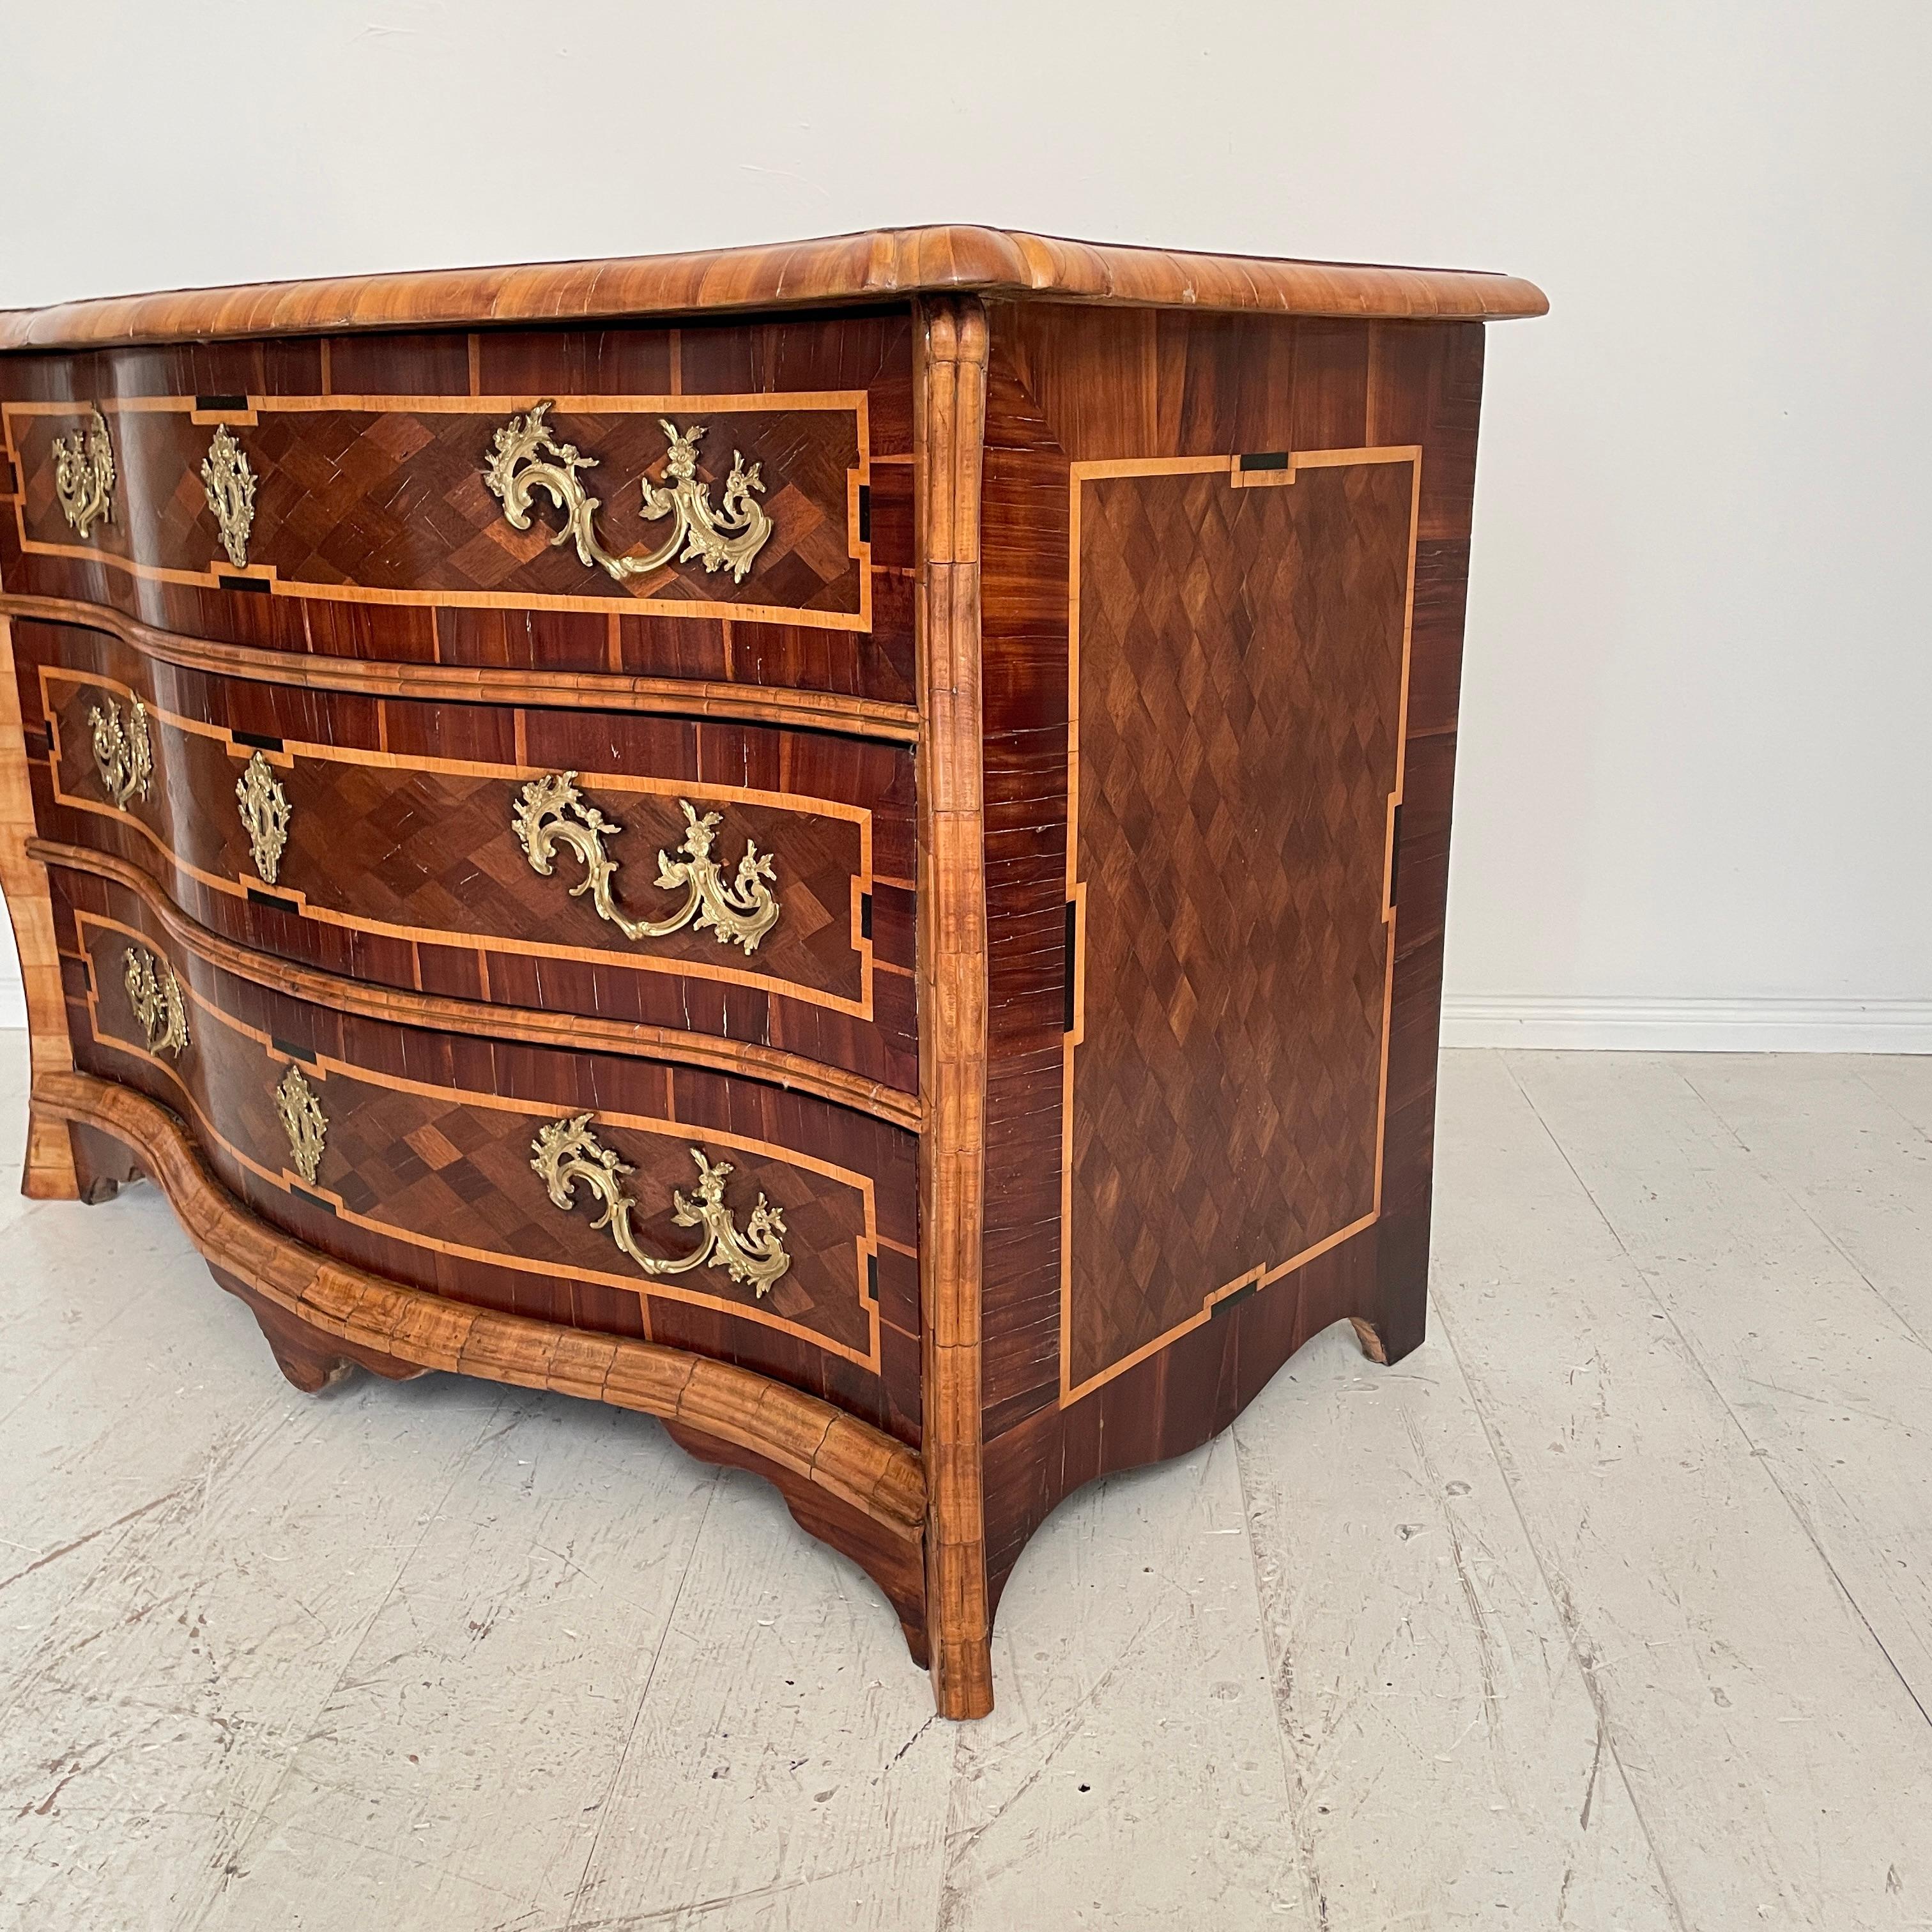 18th Century Dresdner Baroque Commode in Brown Walnut and Amaranth, Around 1760 For Sale 3